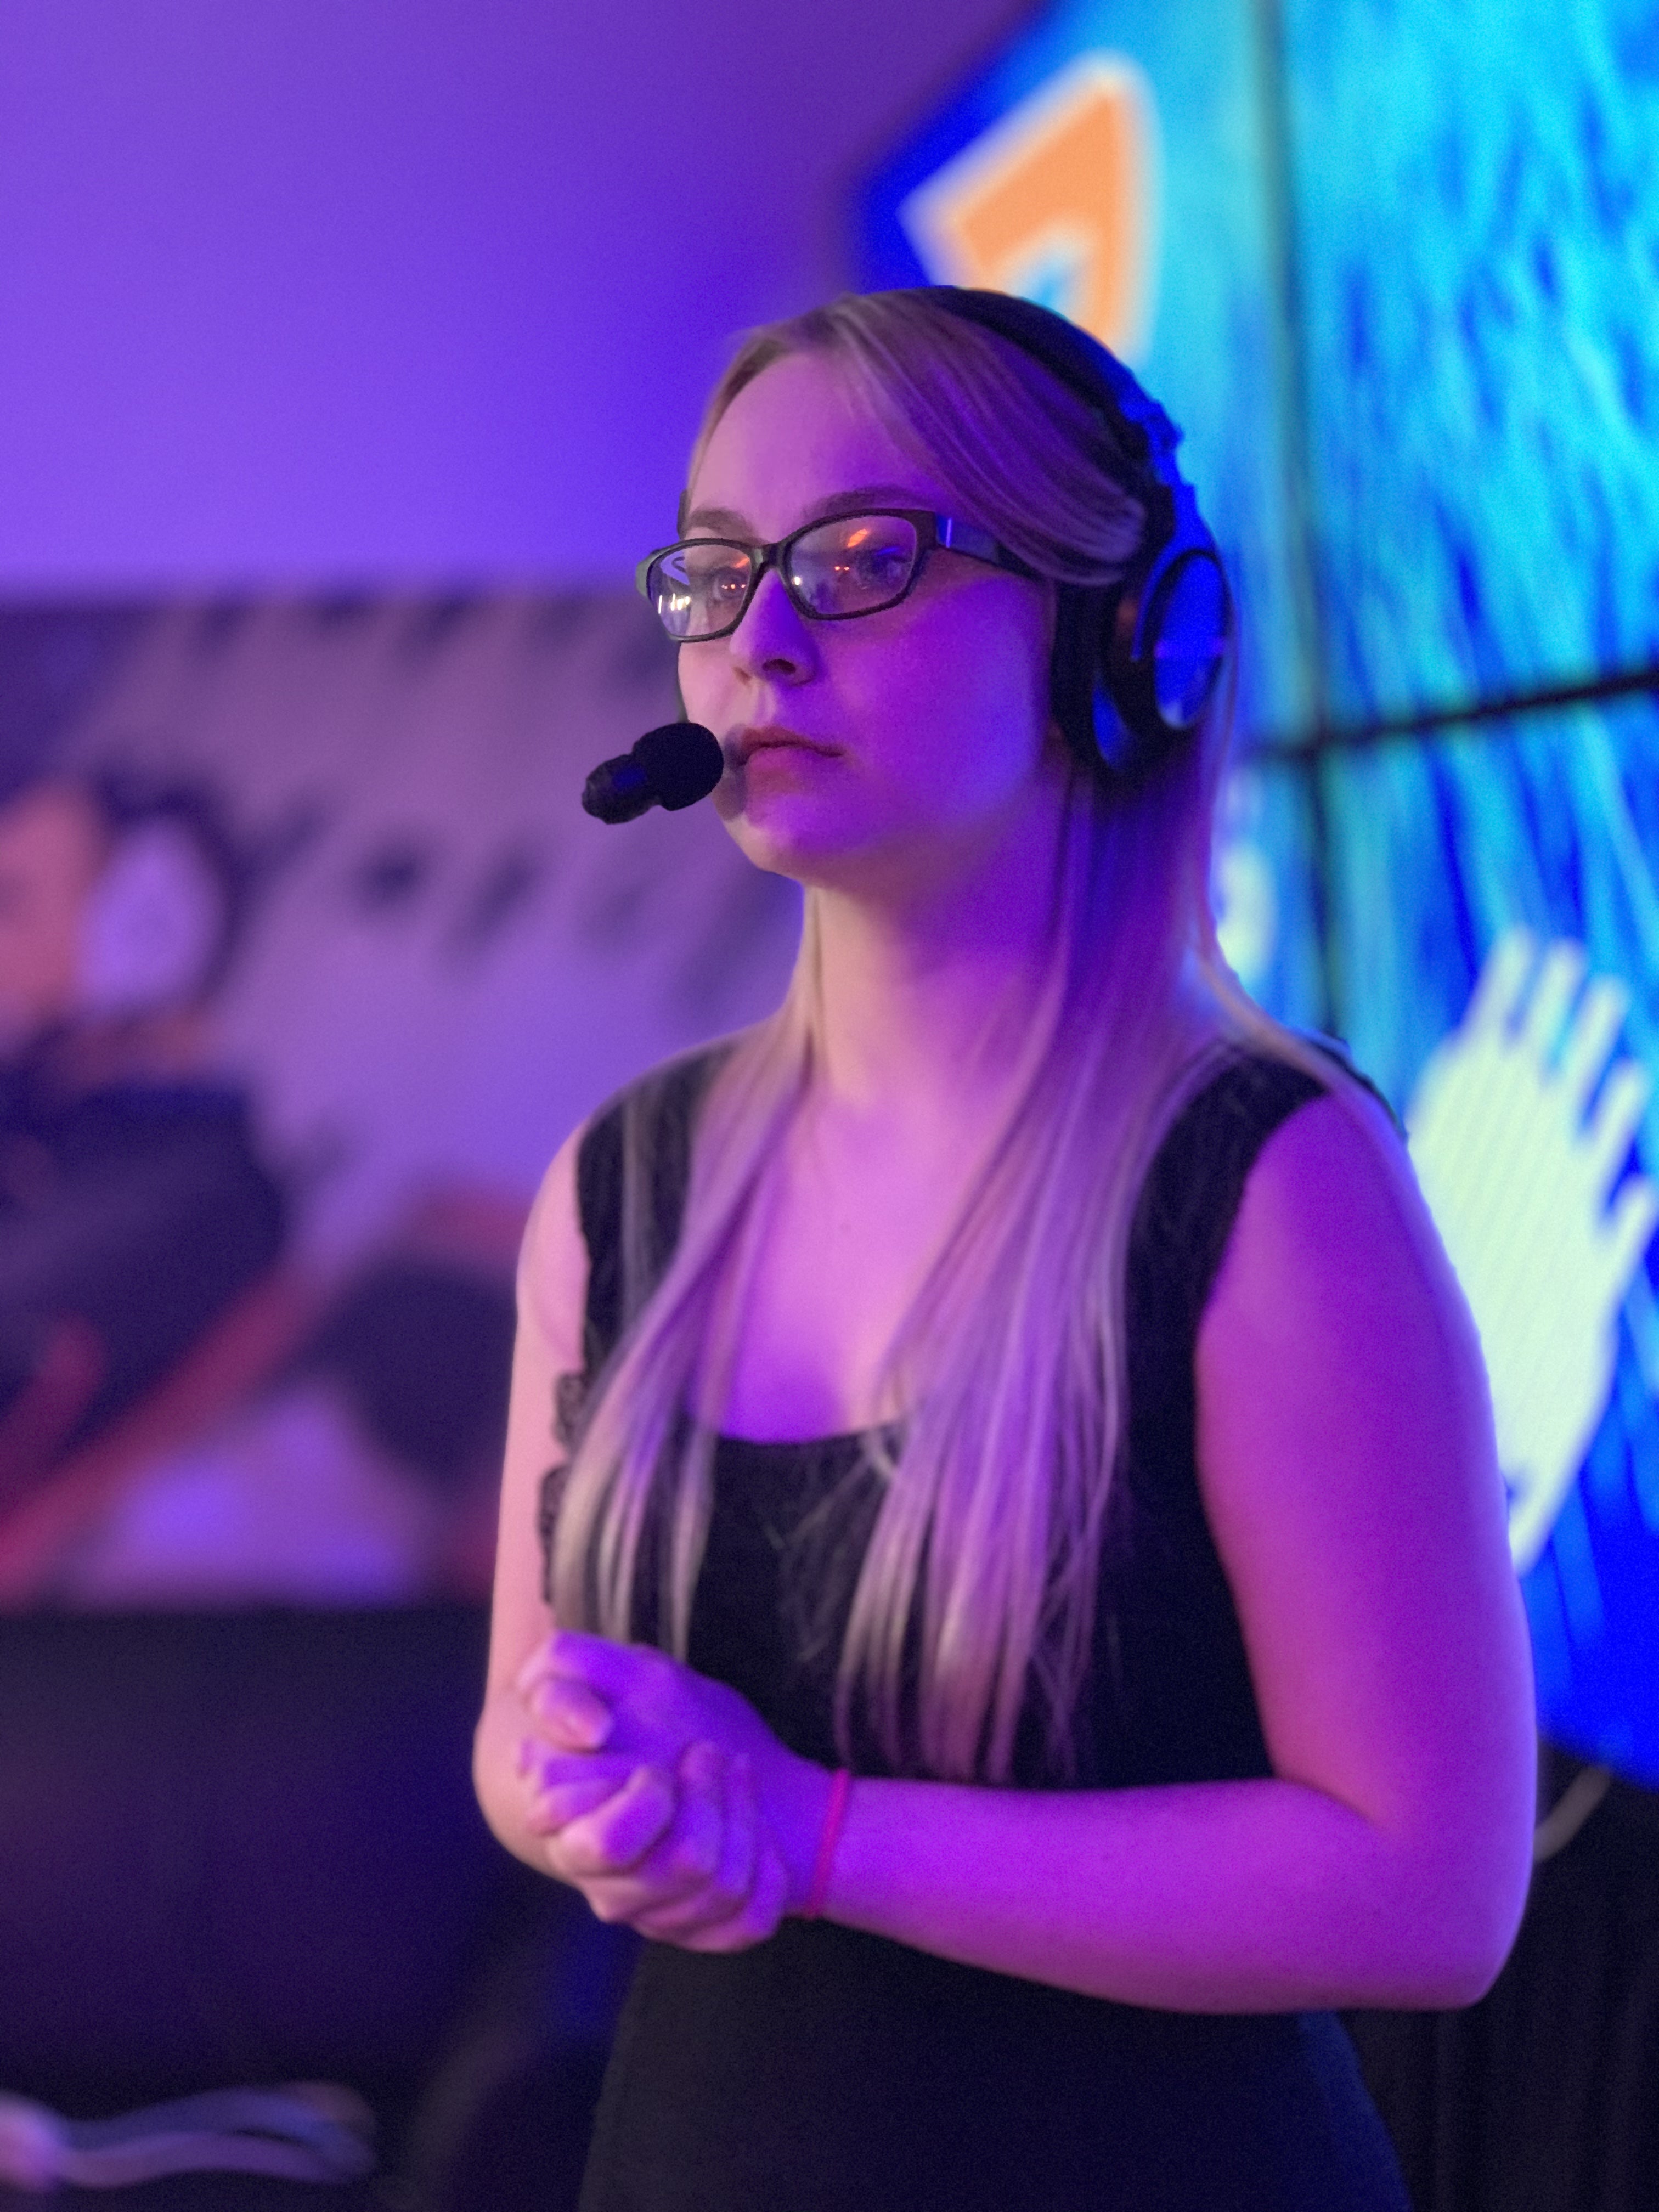 Female esports player with a headset and mic on in a pink lit room